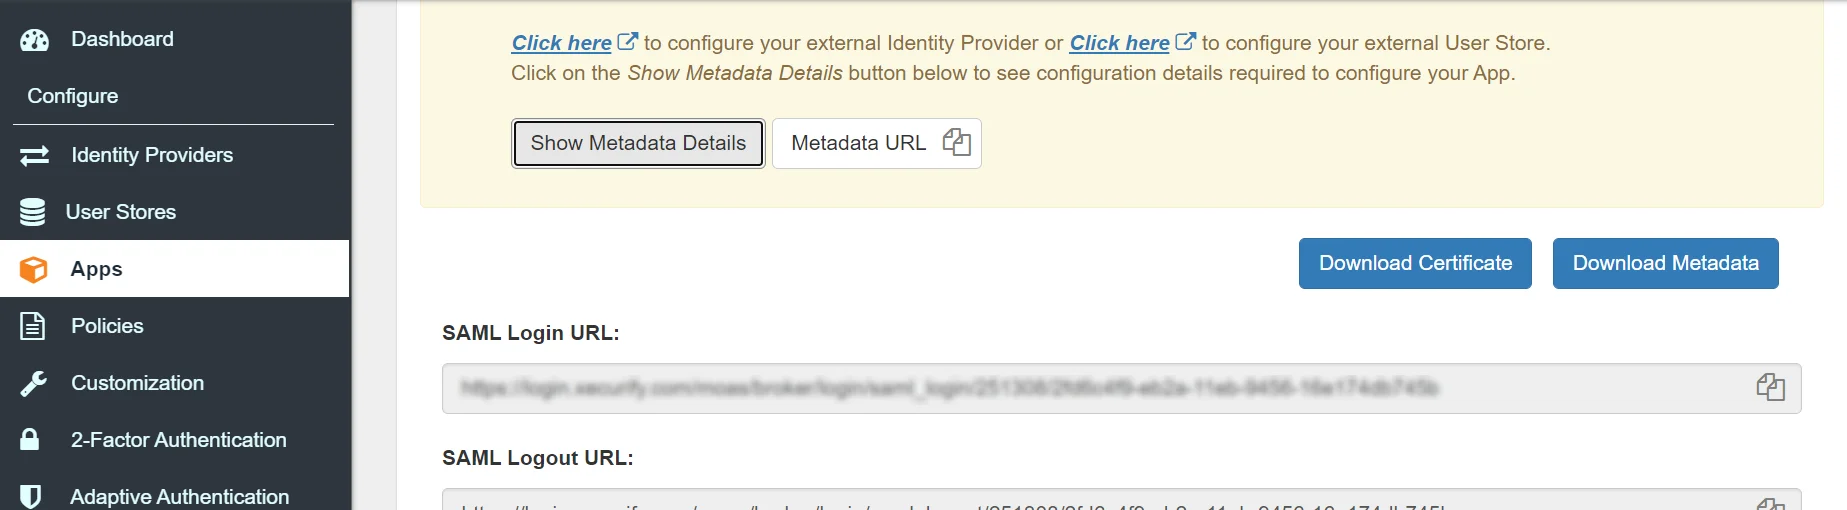 Amazon Seller Central Single Sign On (sso) Download Metadata